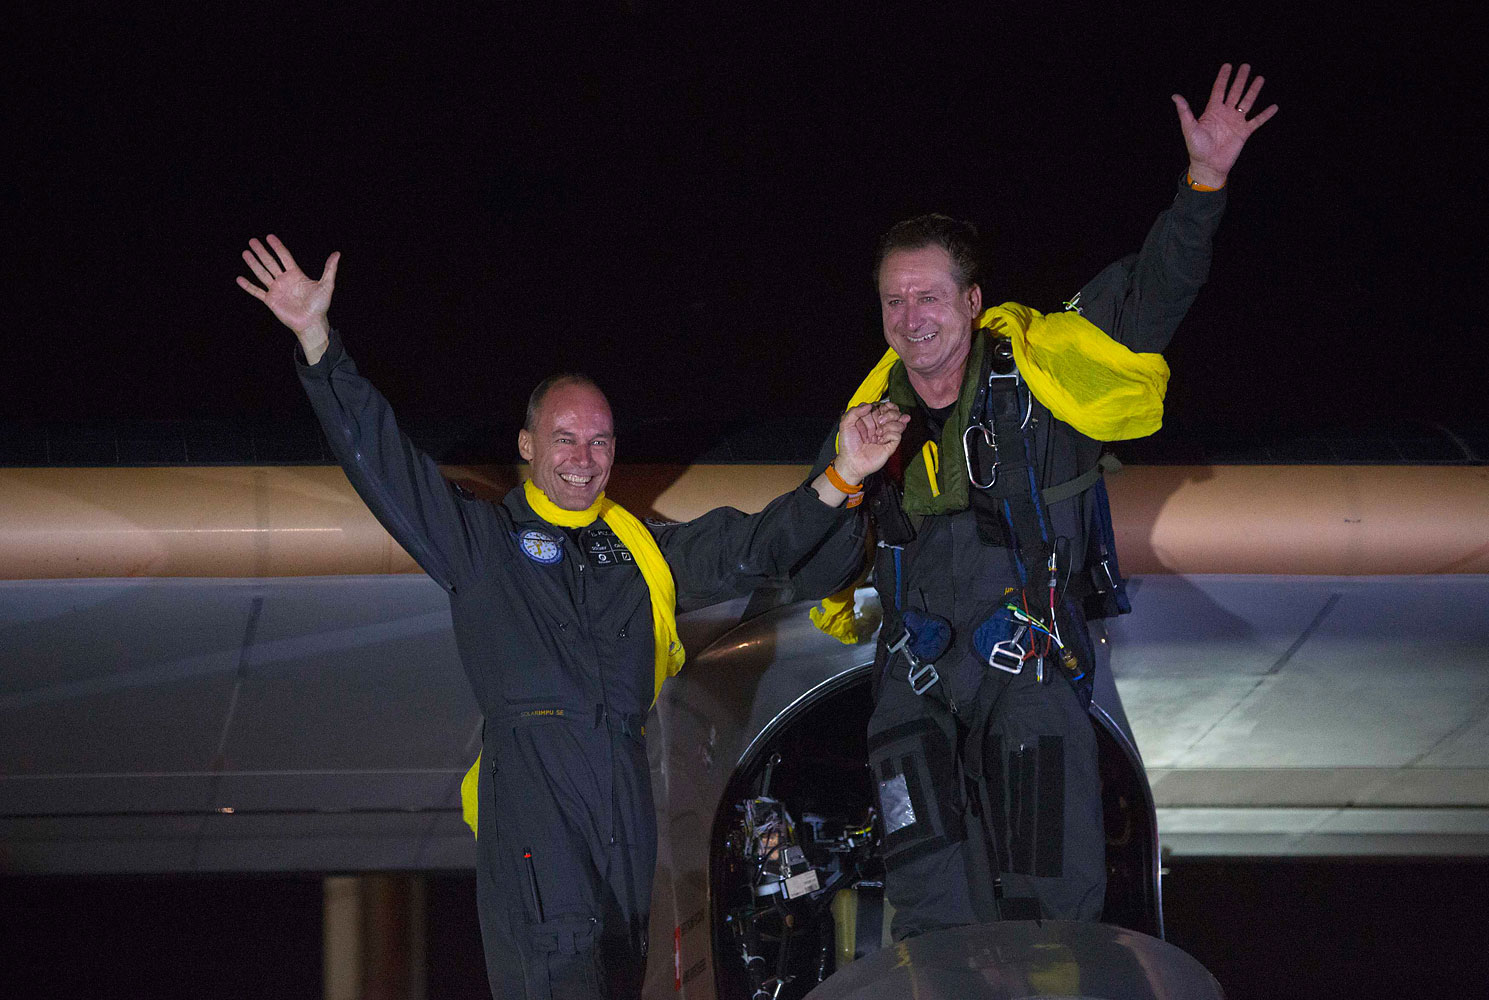 Pilots and founders Bertrand Piccard and Andre Borschberg, right, wave to the crowd after Solar Impulse lands at JFK airport in New York July 6, 2013. The airplane entirely powered by the sun touched down in New York City late on Saturday, completing the final leg of an epic journey across the United States that began over two months ago.